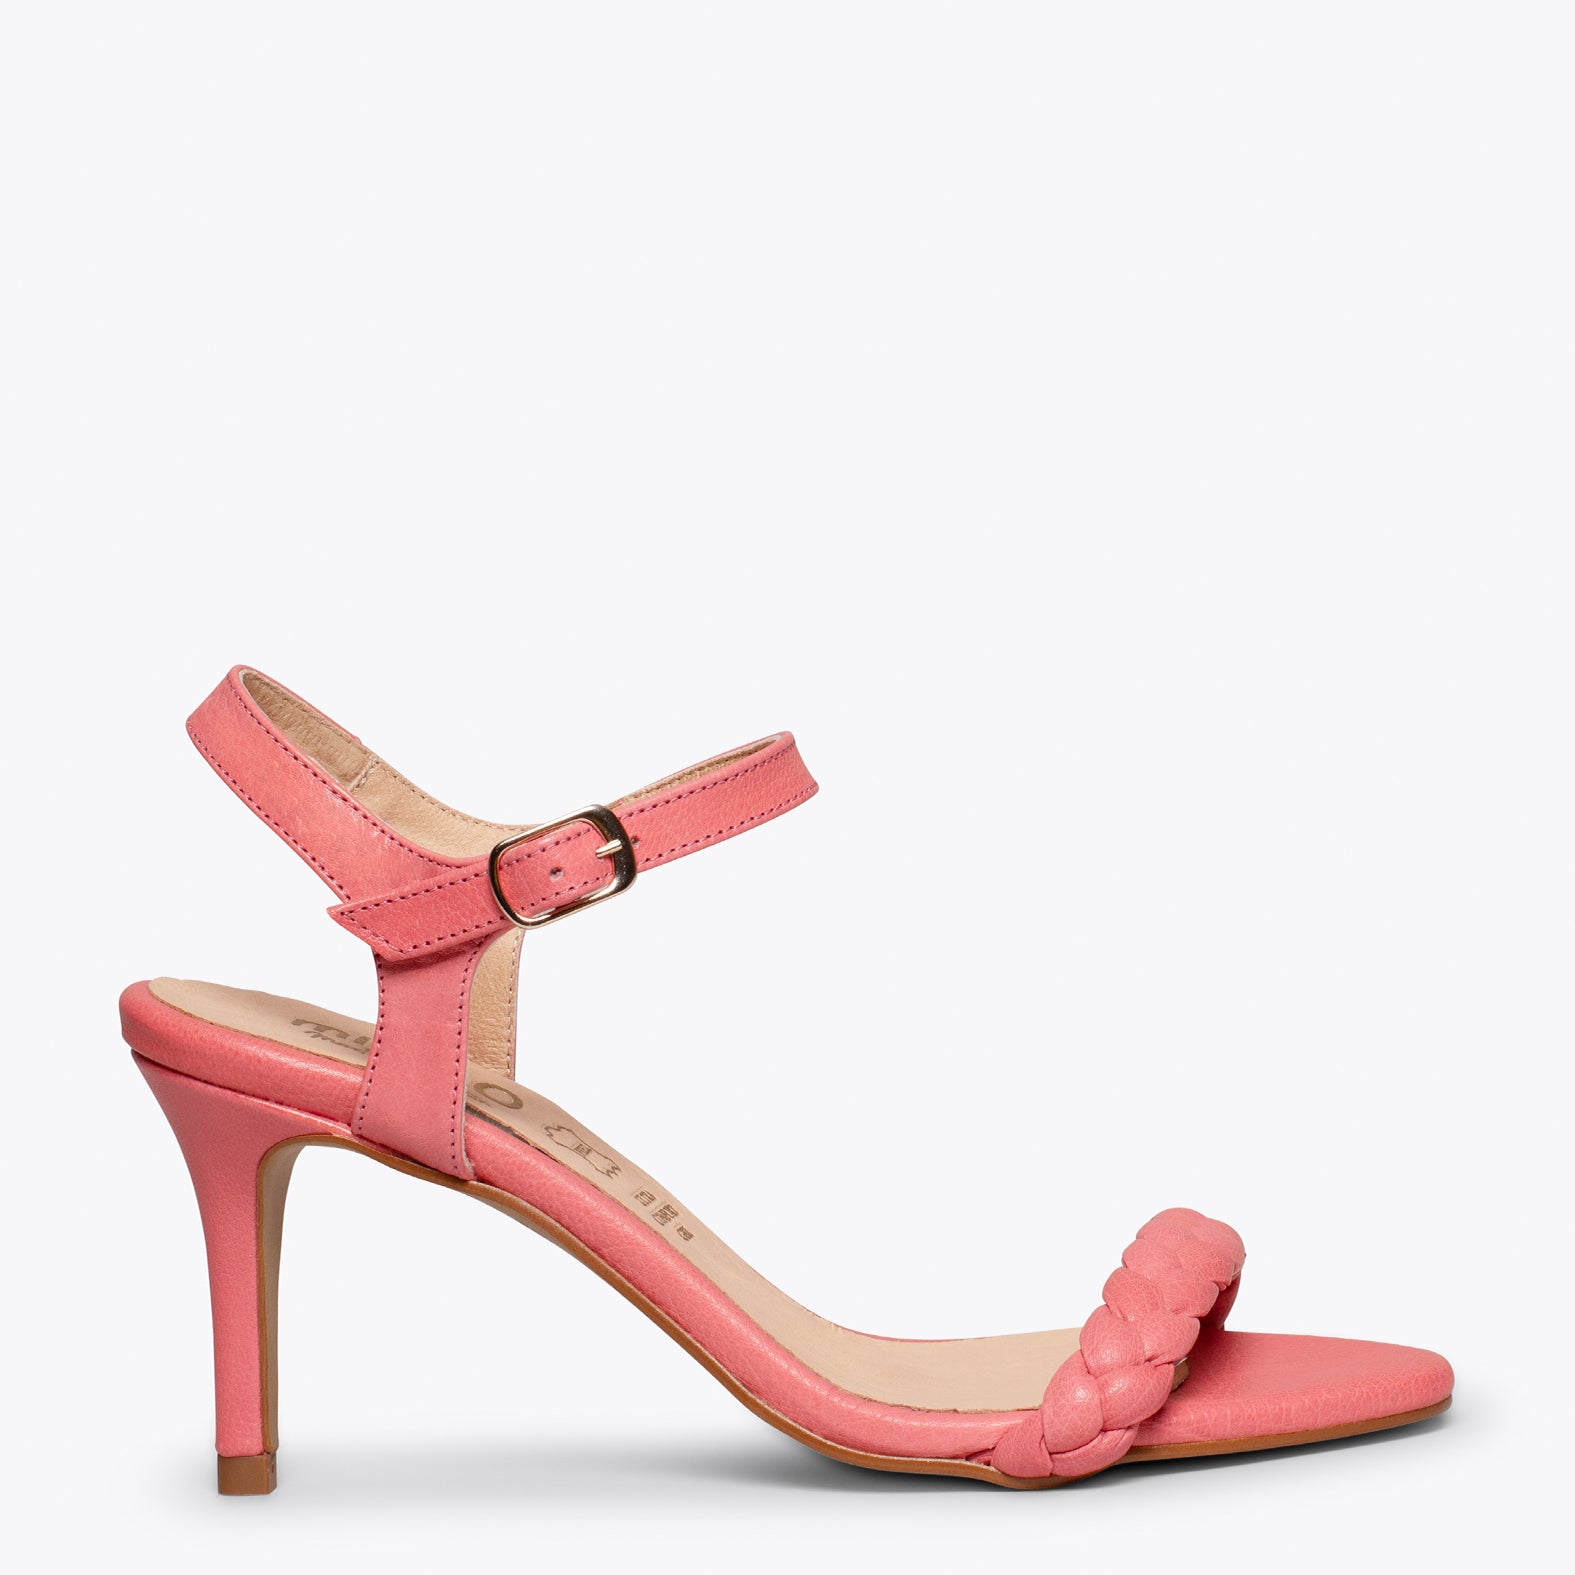 SUNSET – PINK elegant sandals with a braided strap